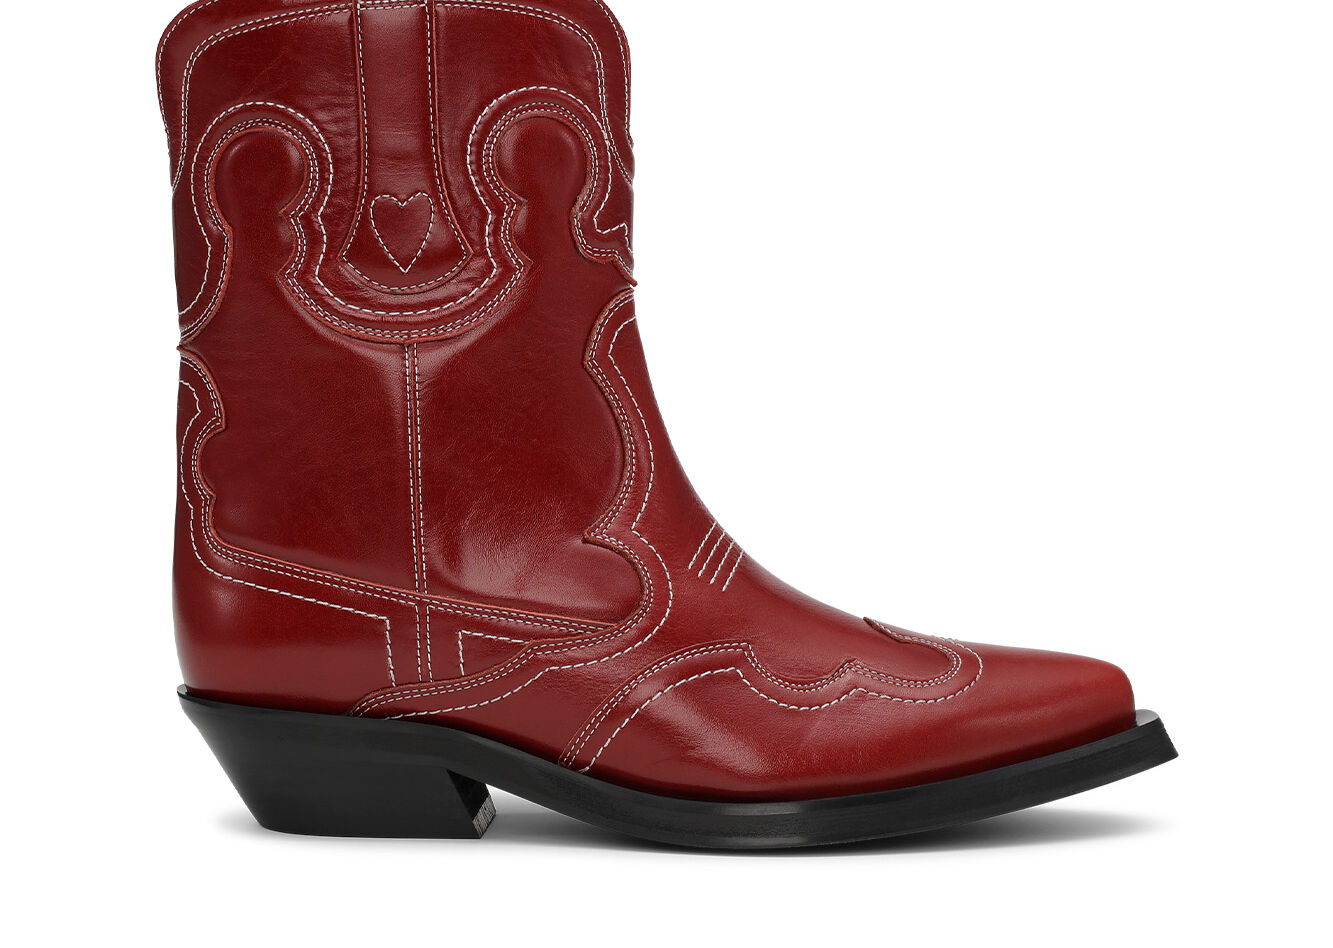 Bottes brodées rouges à tige basse Western, Calf Leather, in colour Barbados Cherry - 1 - GANNI